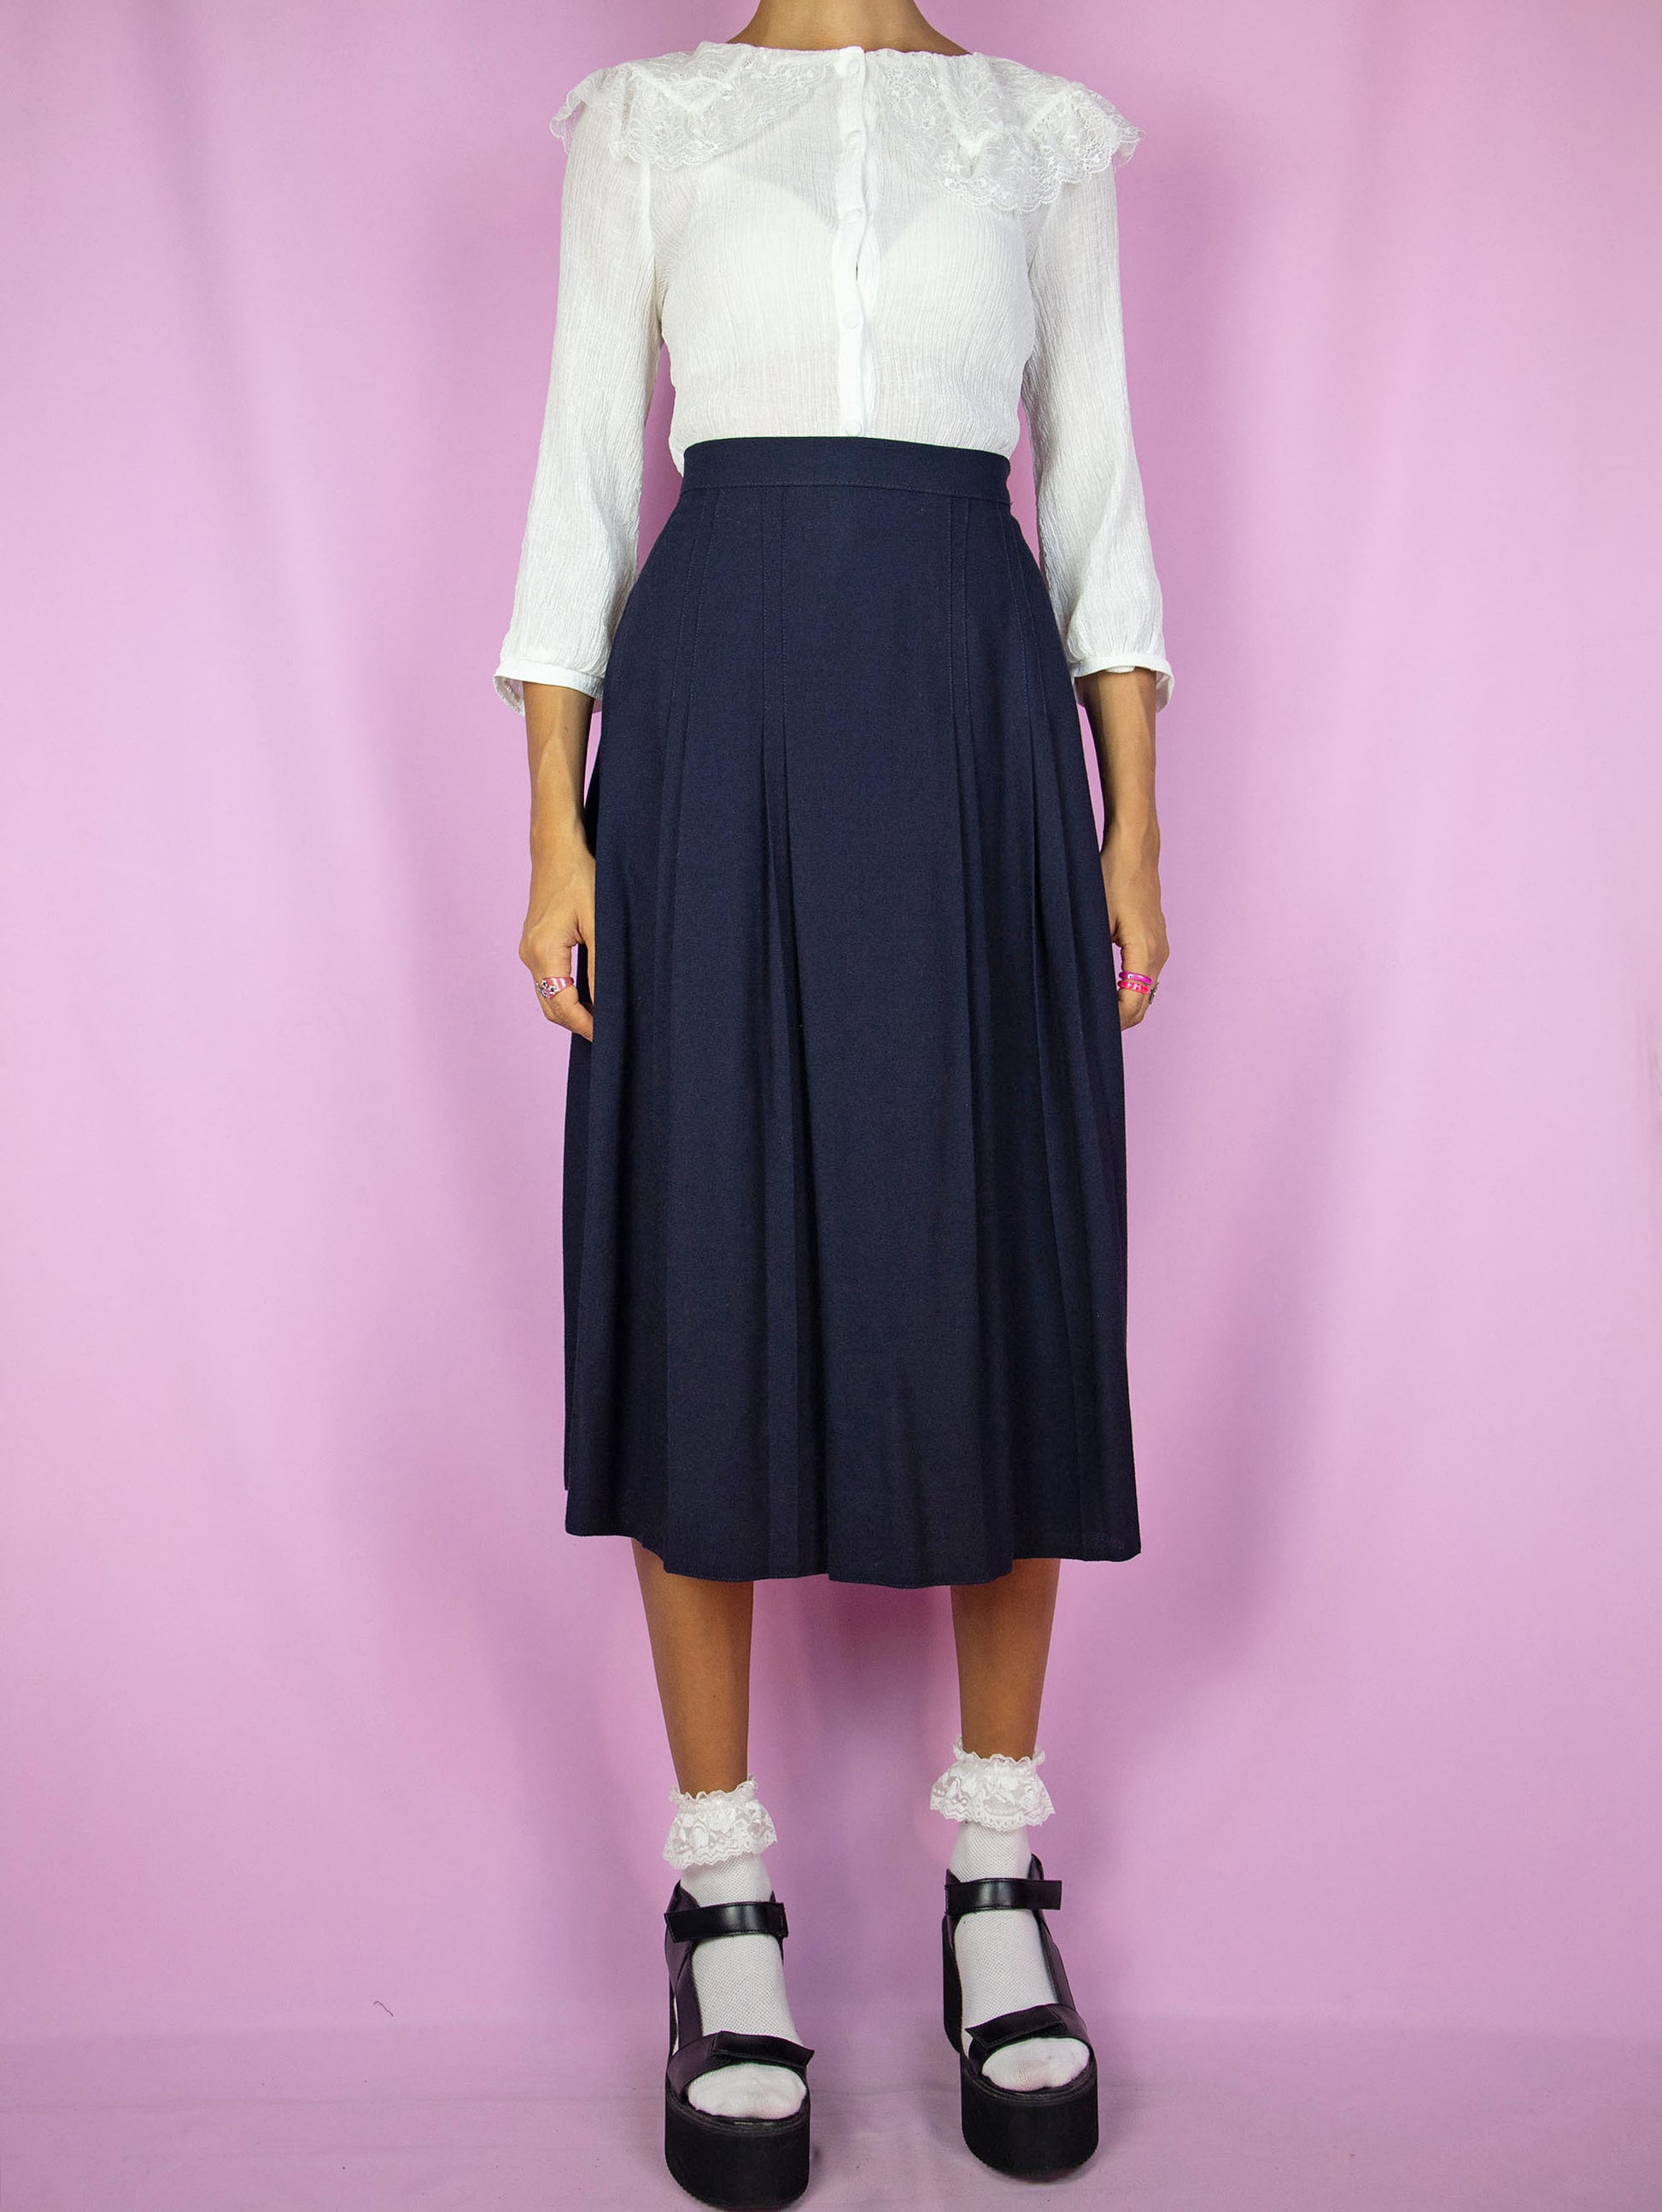 The Vintage 90s Navy Pleated Midi Skirt is a dark blue skirt with a side zipper closure. Classic preppy 1990s skirt.